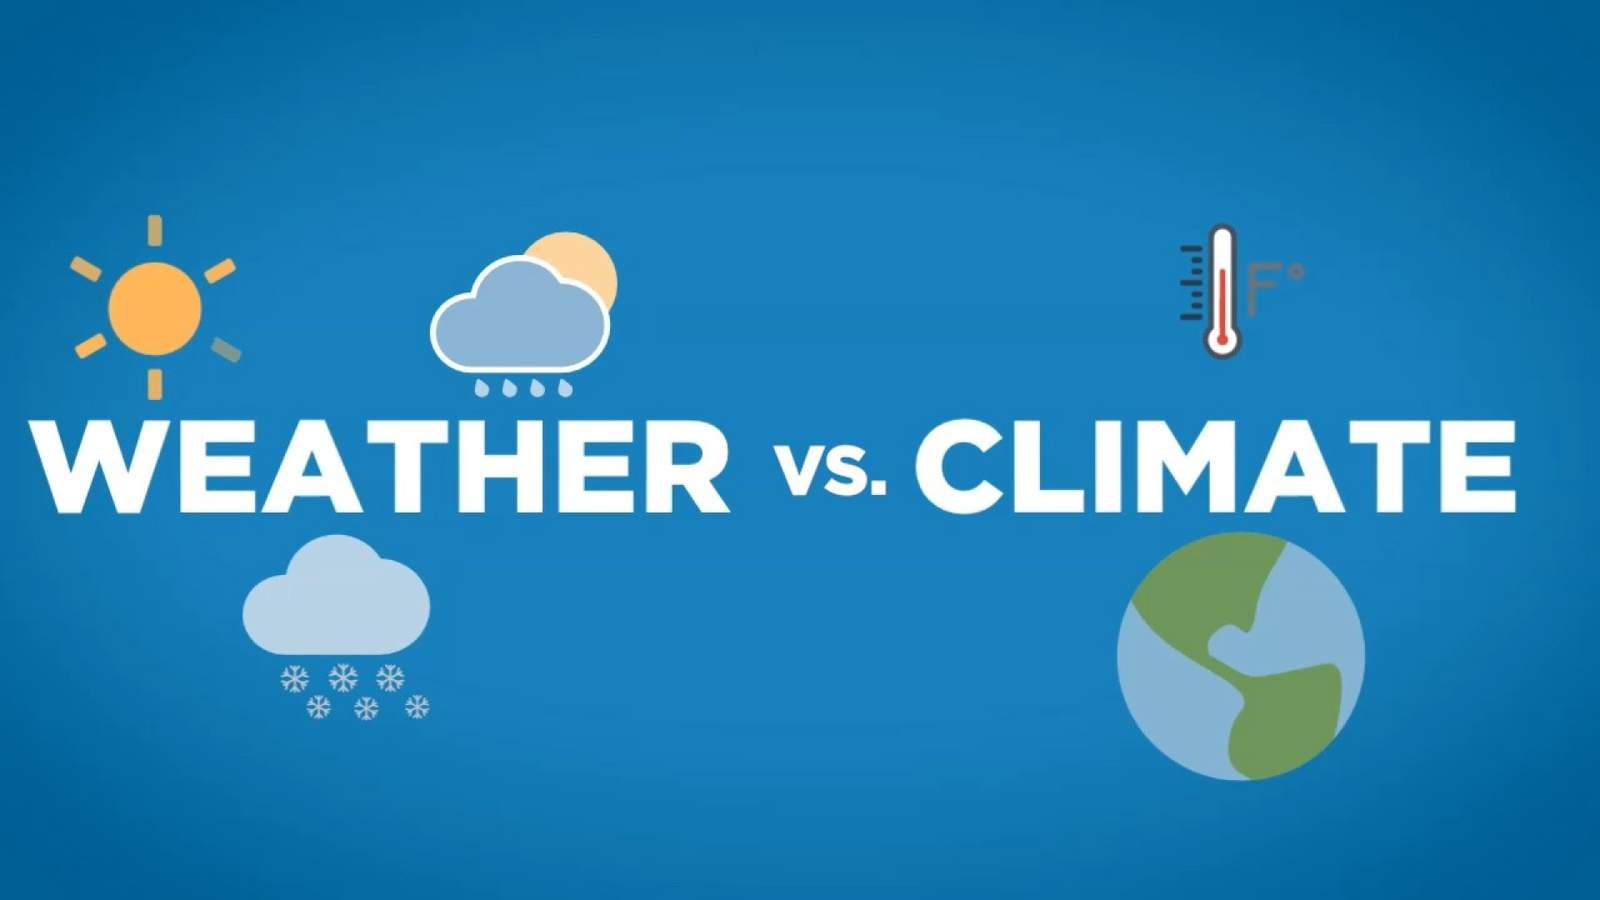 Explained: The difference between weather and climate